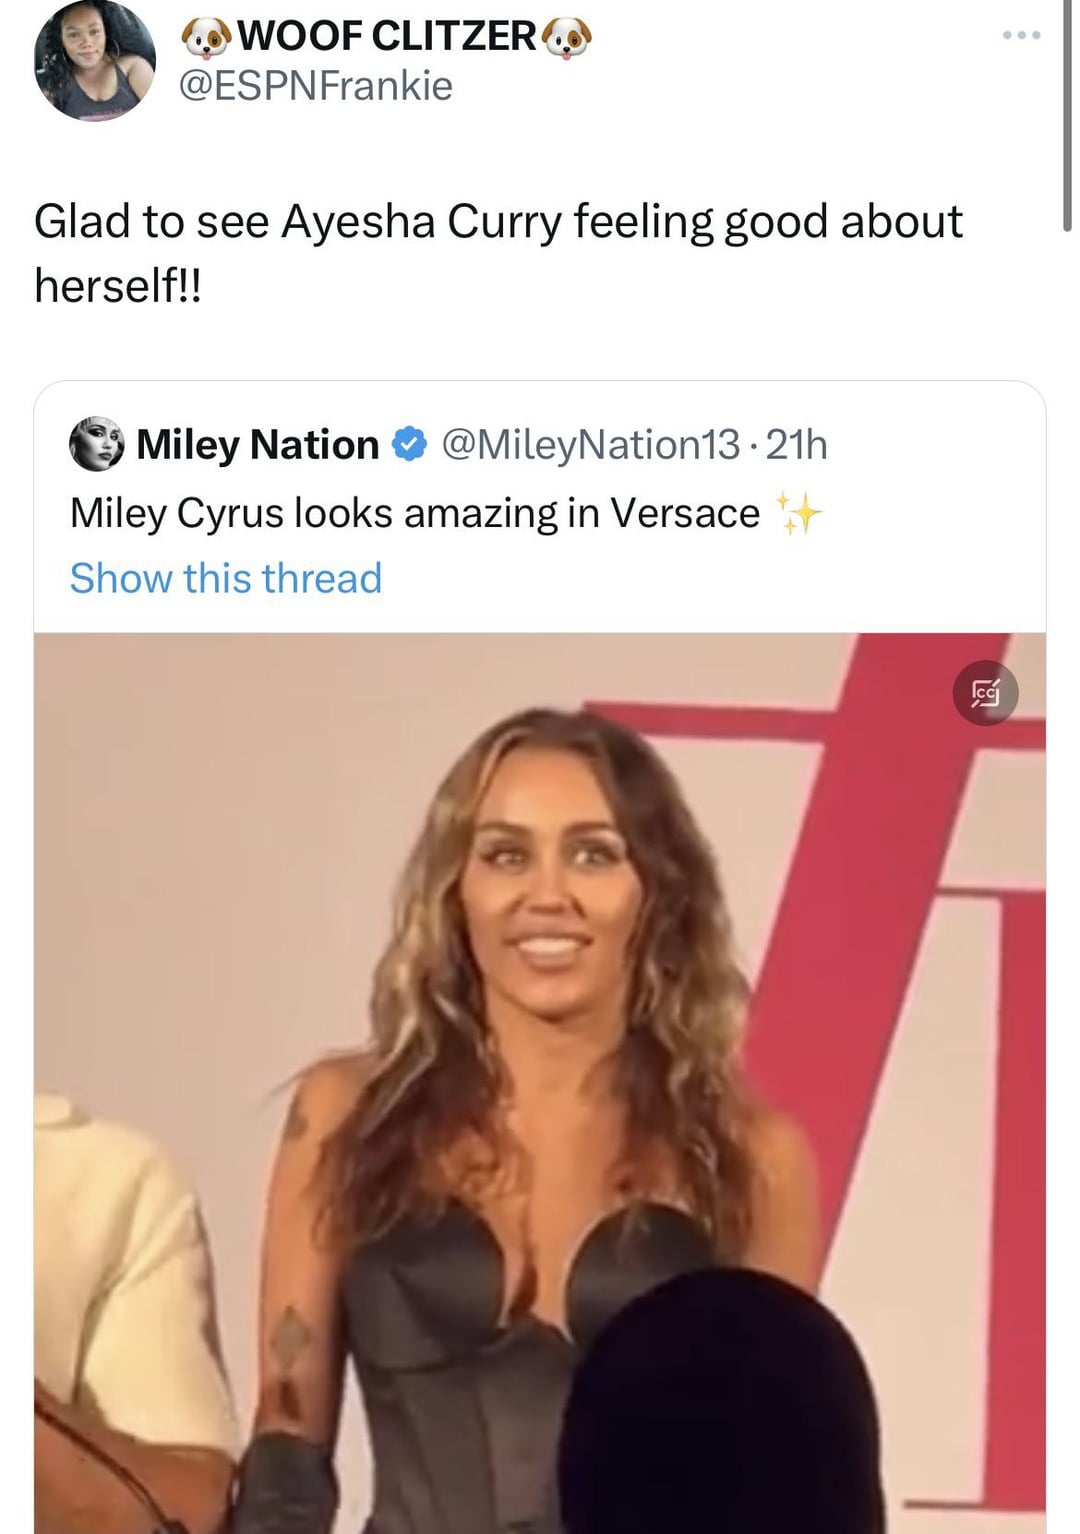 funny tweets and memes - shoulder - Woof Clitzer Frankie Glad to see Ayesha Curry feeling good about herself!! Miley Nation .21h Miley Cyrus looks amazing in Versace Show this thread Ic